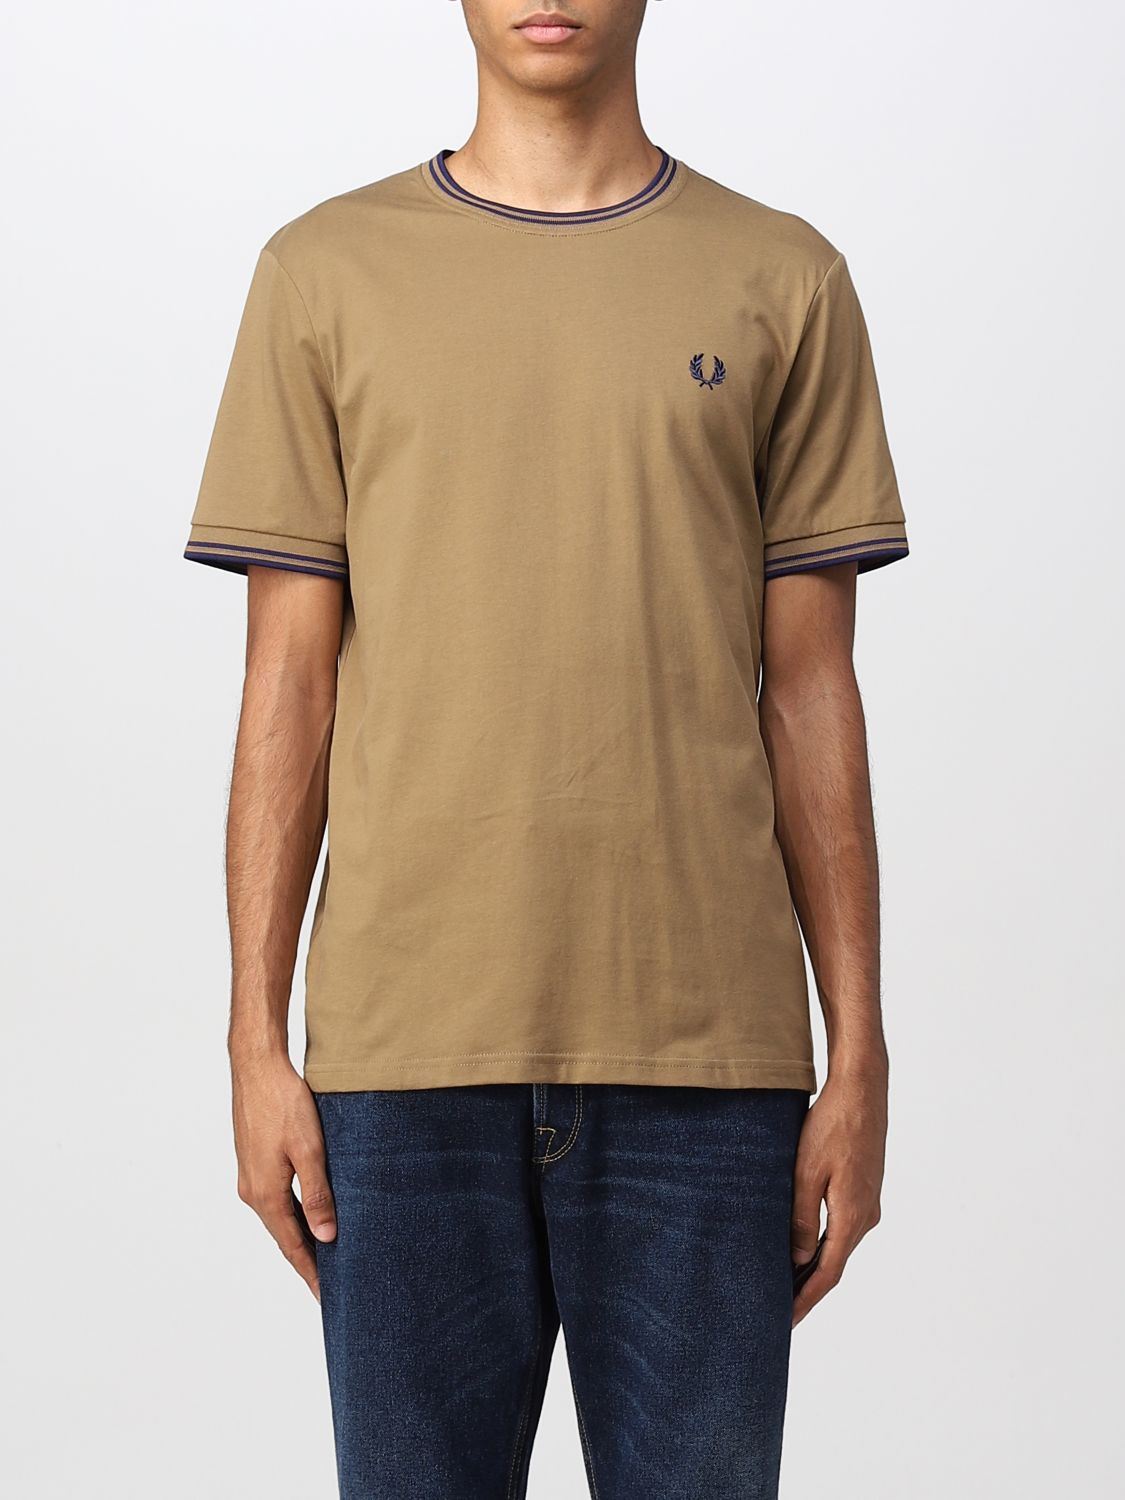 T-shirt Fred Perry: Fred Perry t-shirt for men brown 1